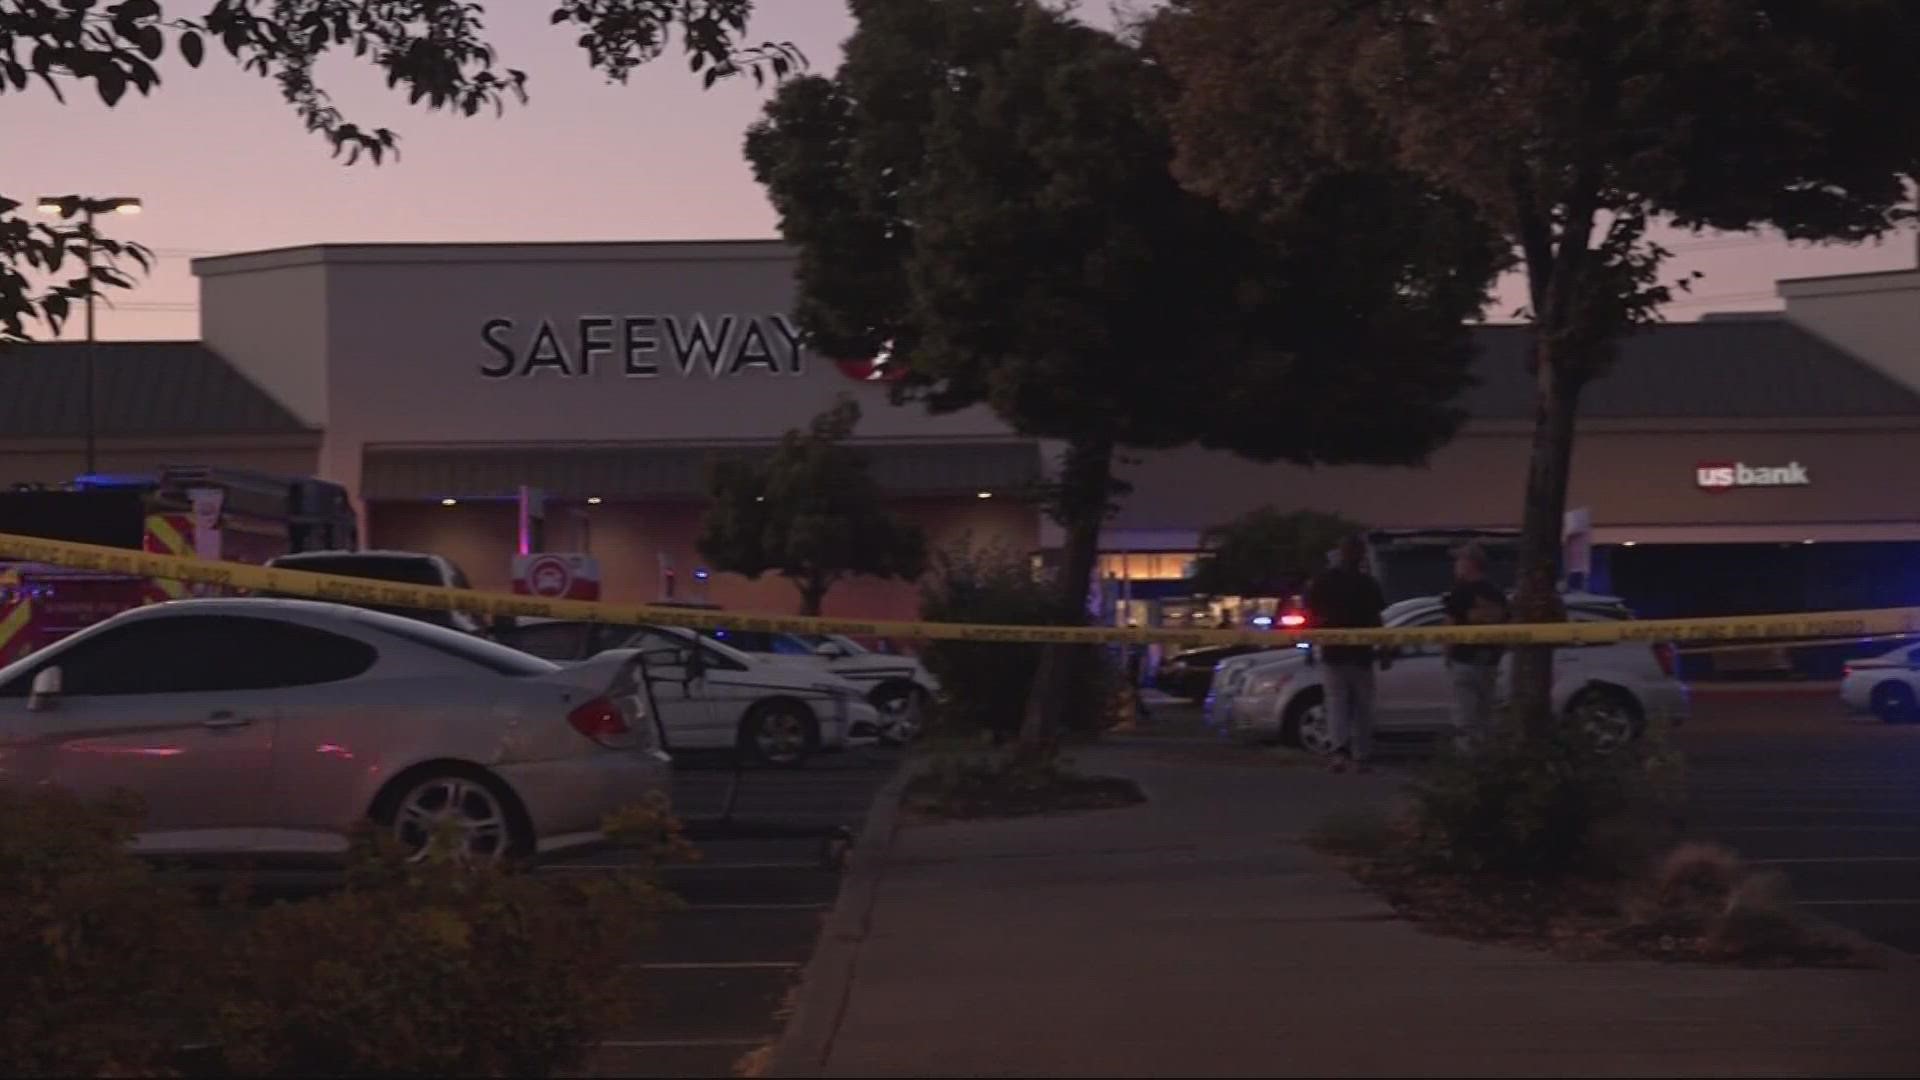 Bend police say the man starting shooting in the parking lot of the Forum Shopping Center, then went inside the Safeway store and kept firing.